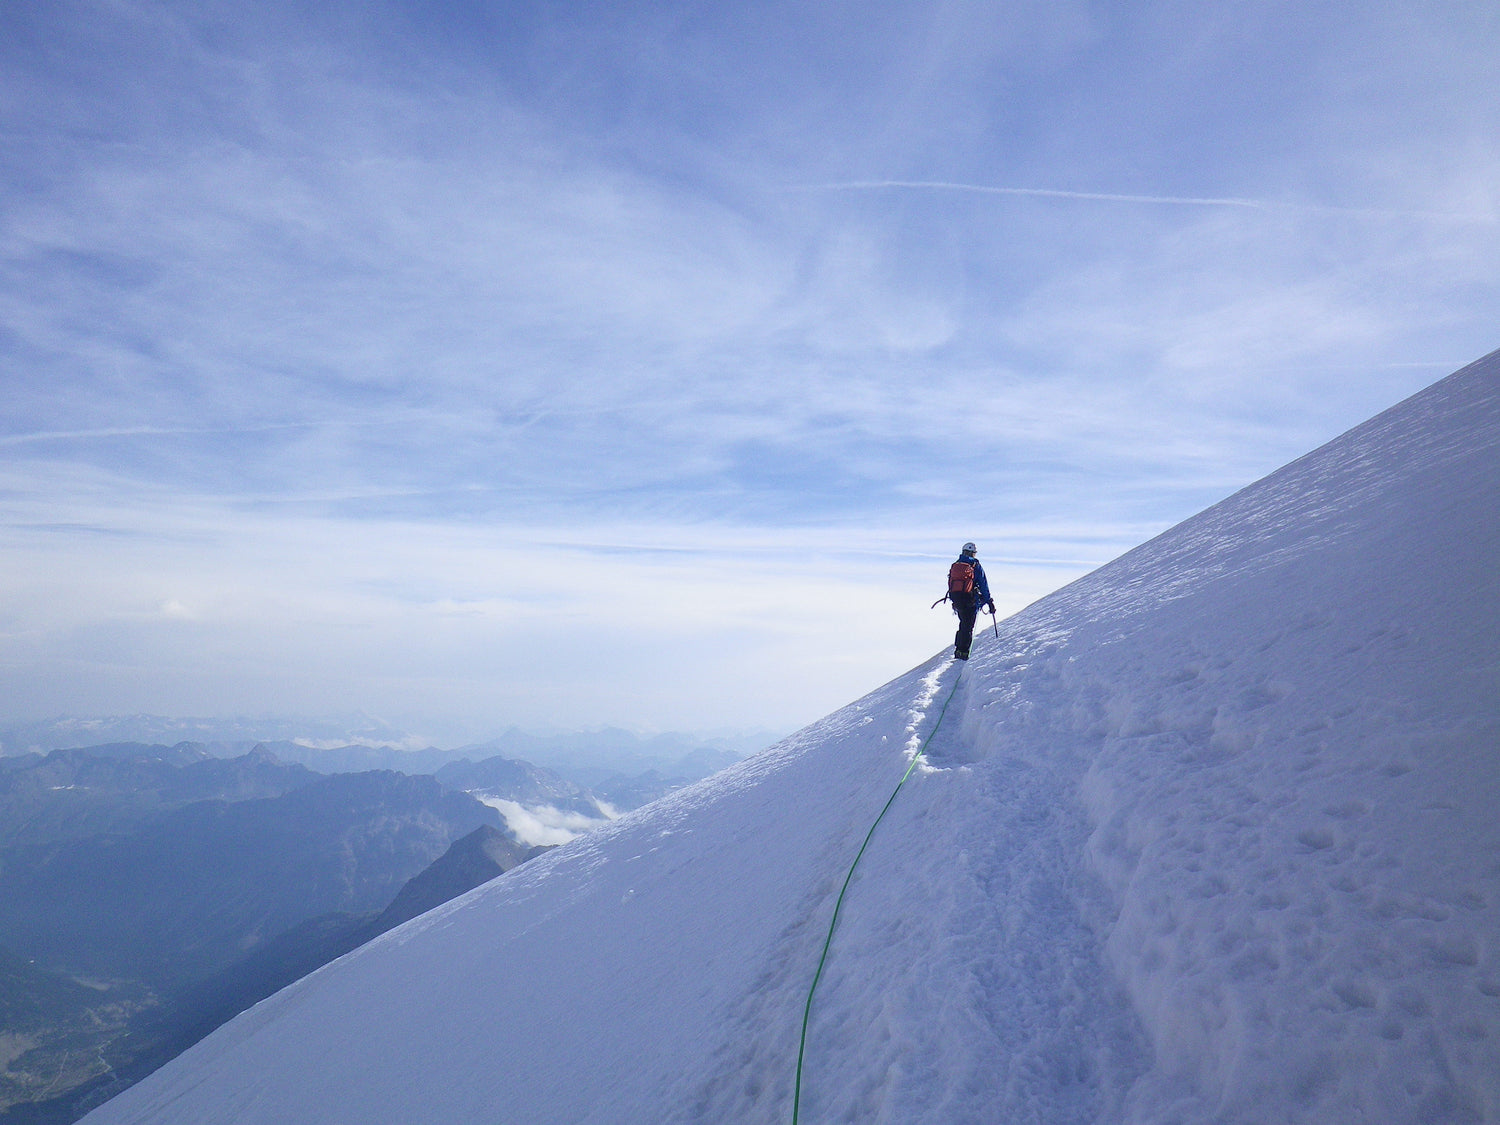 A female Alpinist traverses a snow slope under a cloudy blue sky